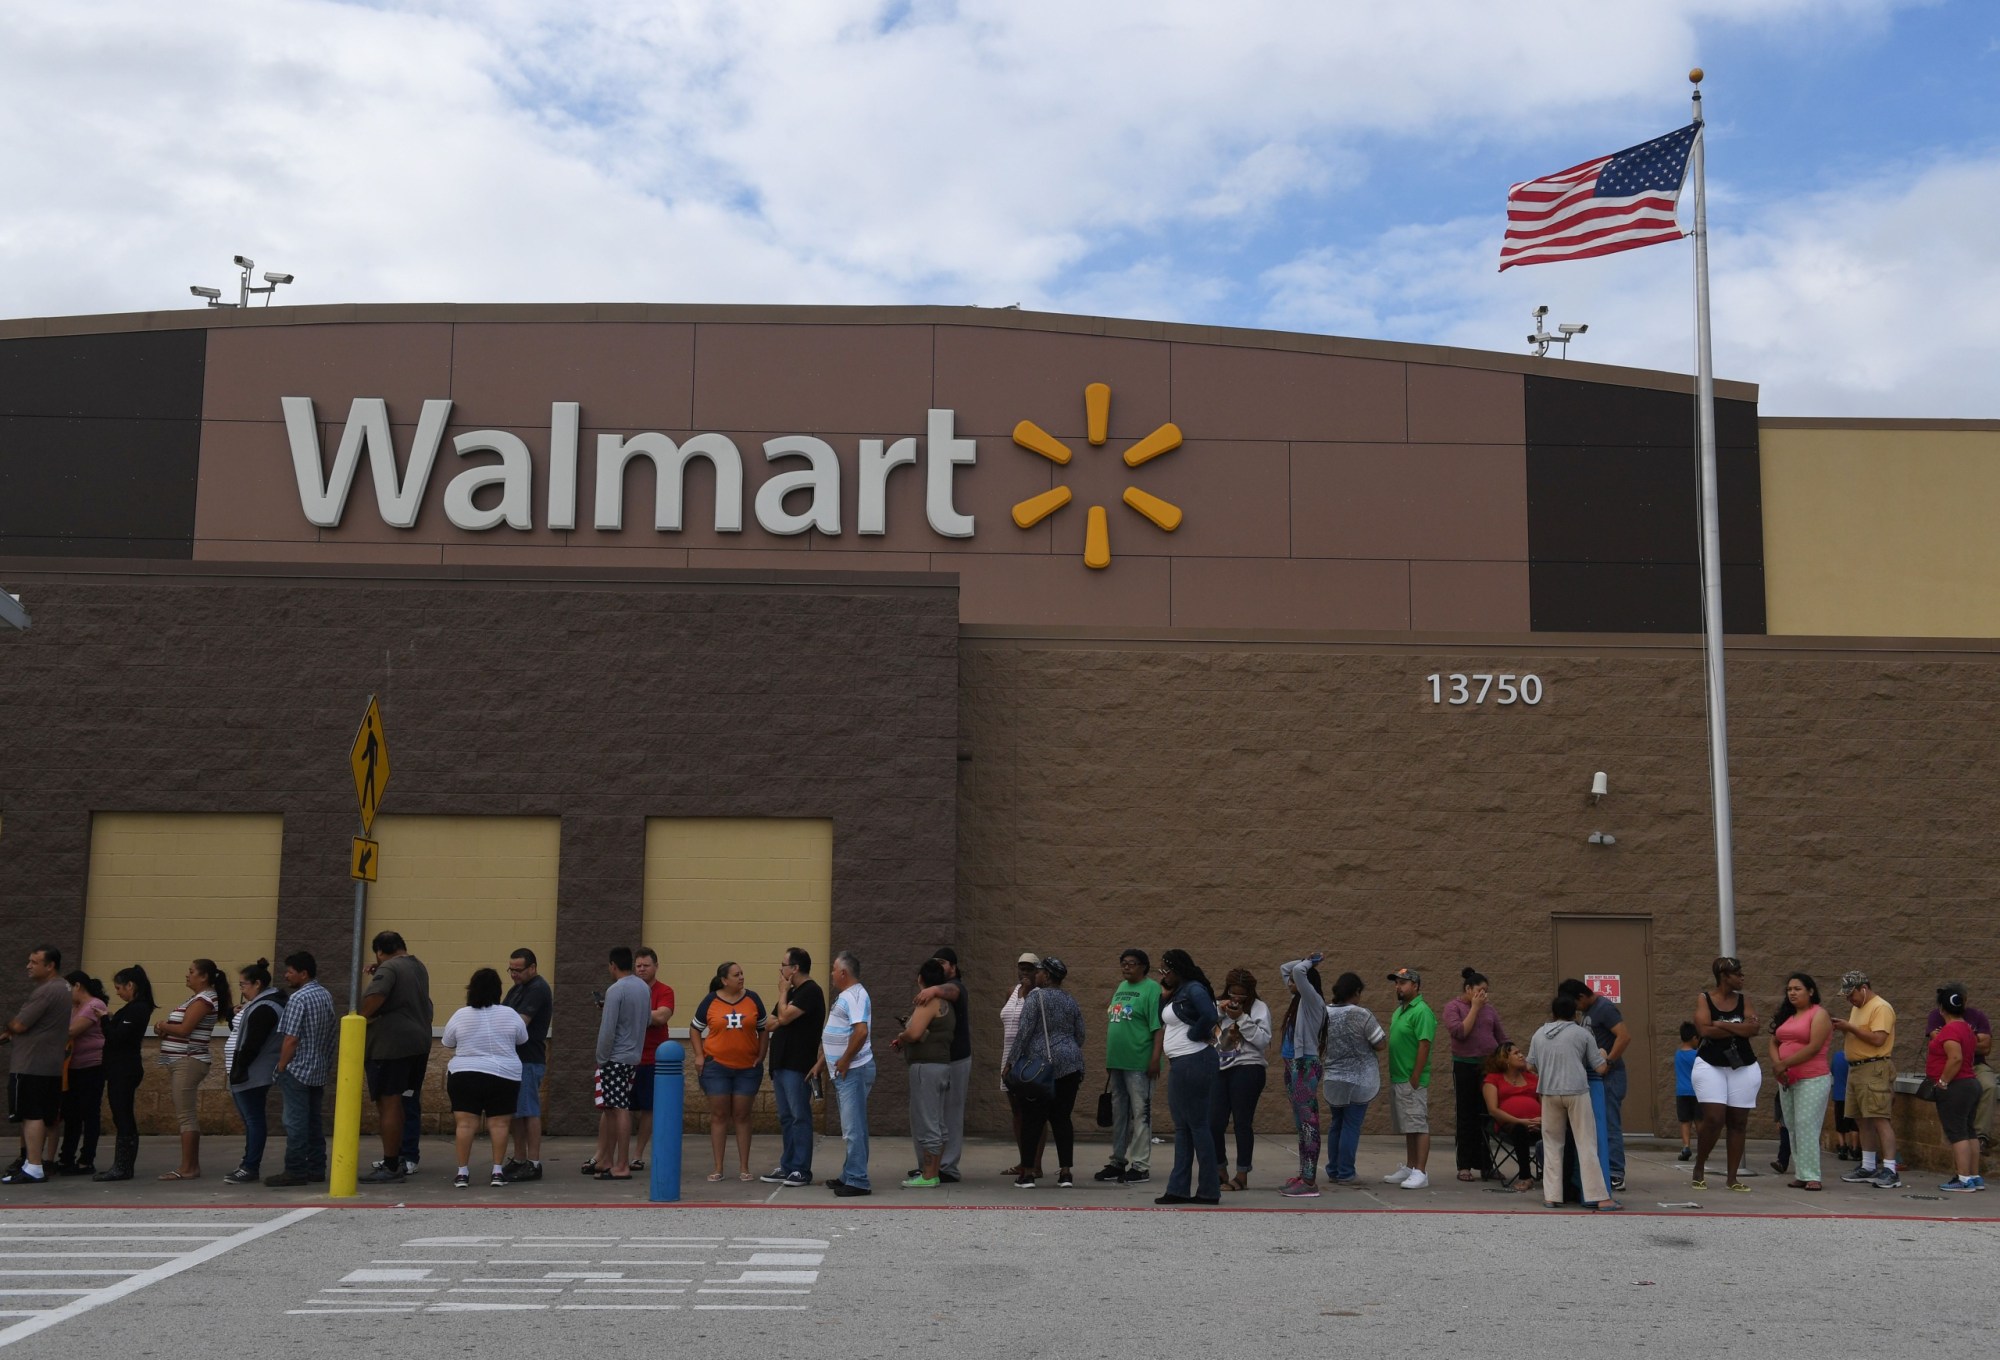 People wait in line for a Walmart store to open after Hurricane Harvey caused heavy flooding in Houston, Texas on August 30, 2017.
Monster storm Harvey made landfall again Wednesday in Louisiana, evoking painful memories of Hurricane Katrina's deadly strike 12 years ago, as time was running out in Texas to find survivors in the raging floodwaters. / AFP PHOTO / MARK RALSTON        (Photo credit should read MARK RALSTON/AFP via Getty Images)